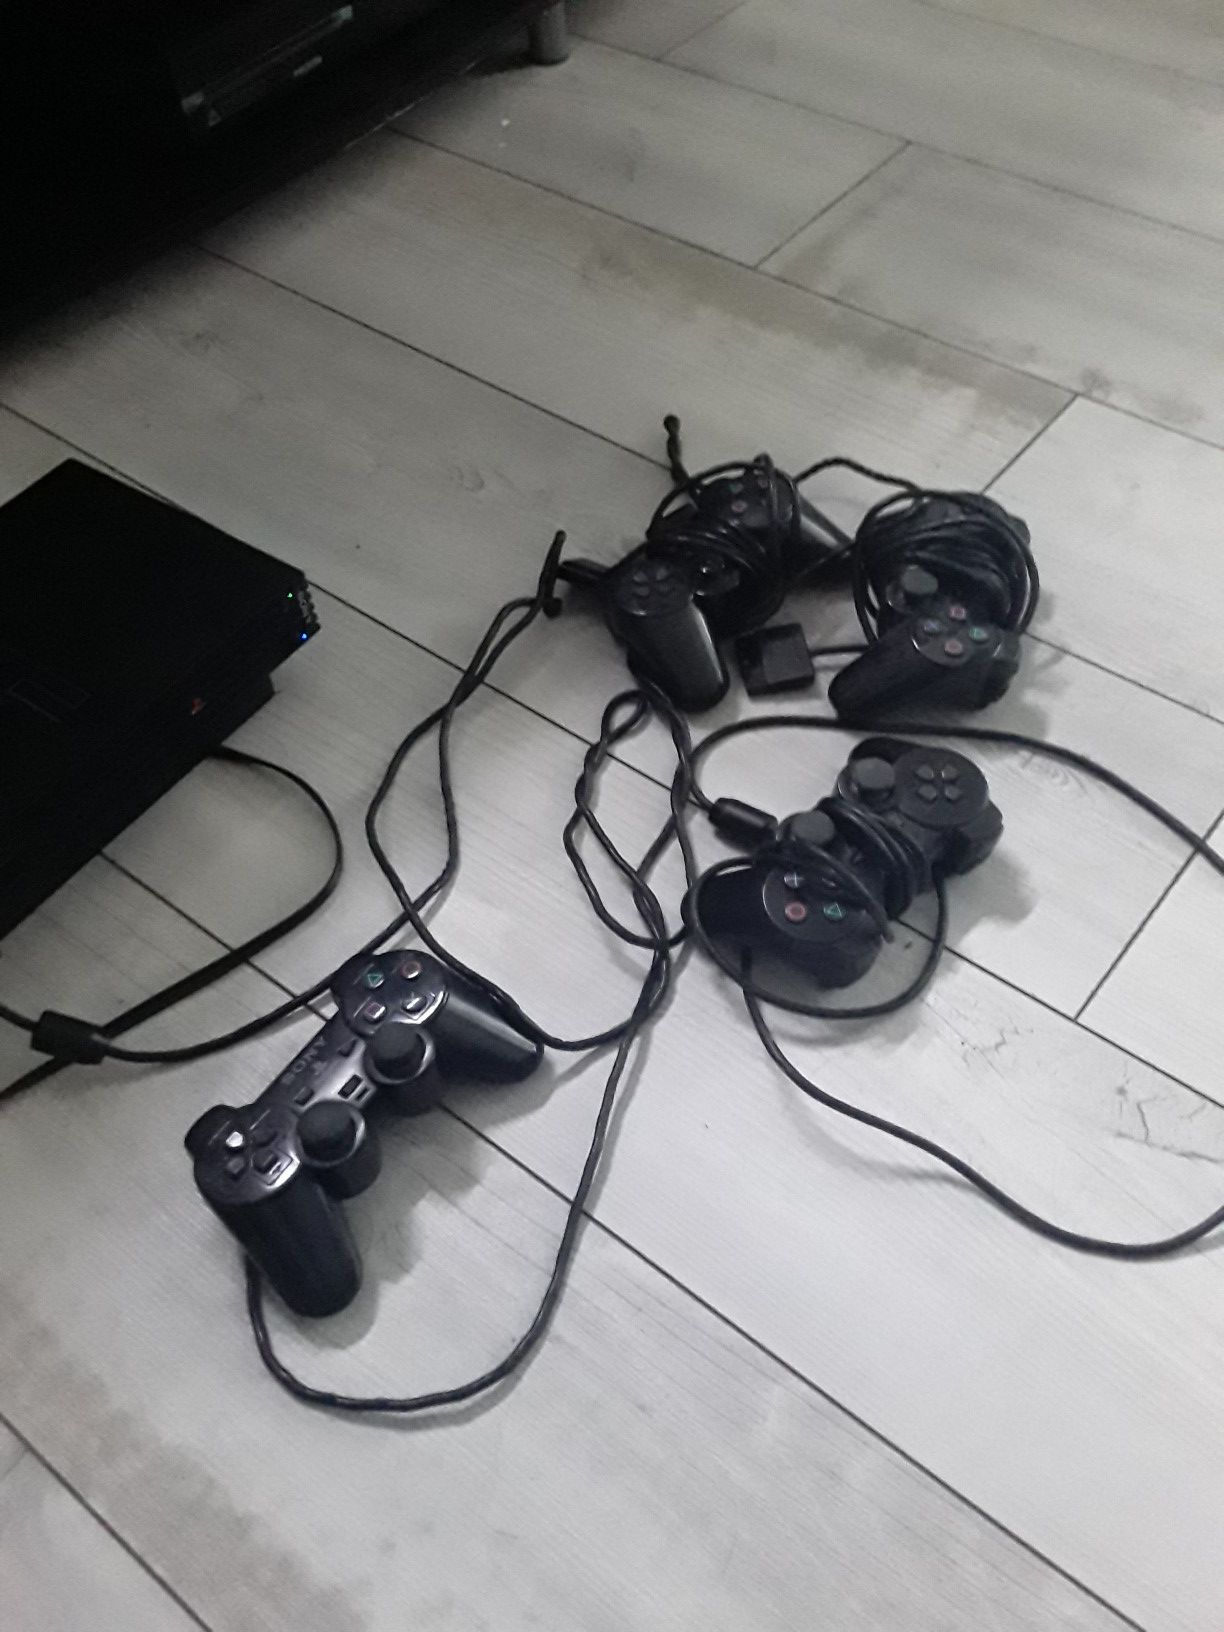 Ps2 four controllers and memory card